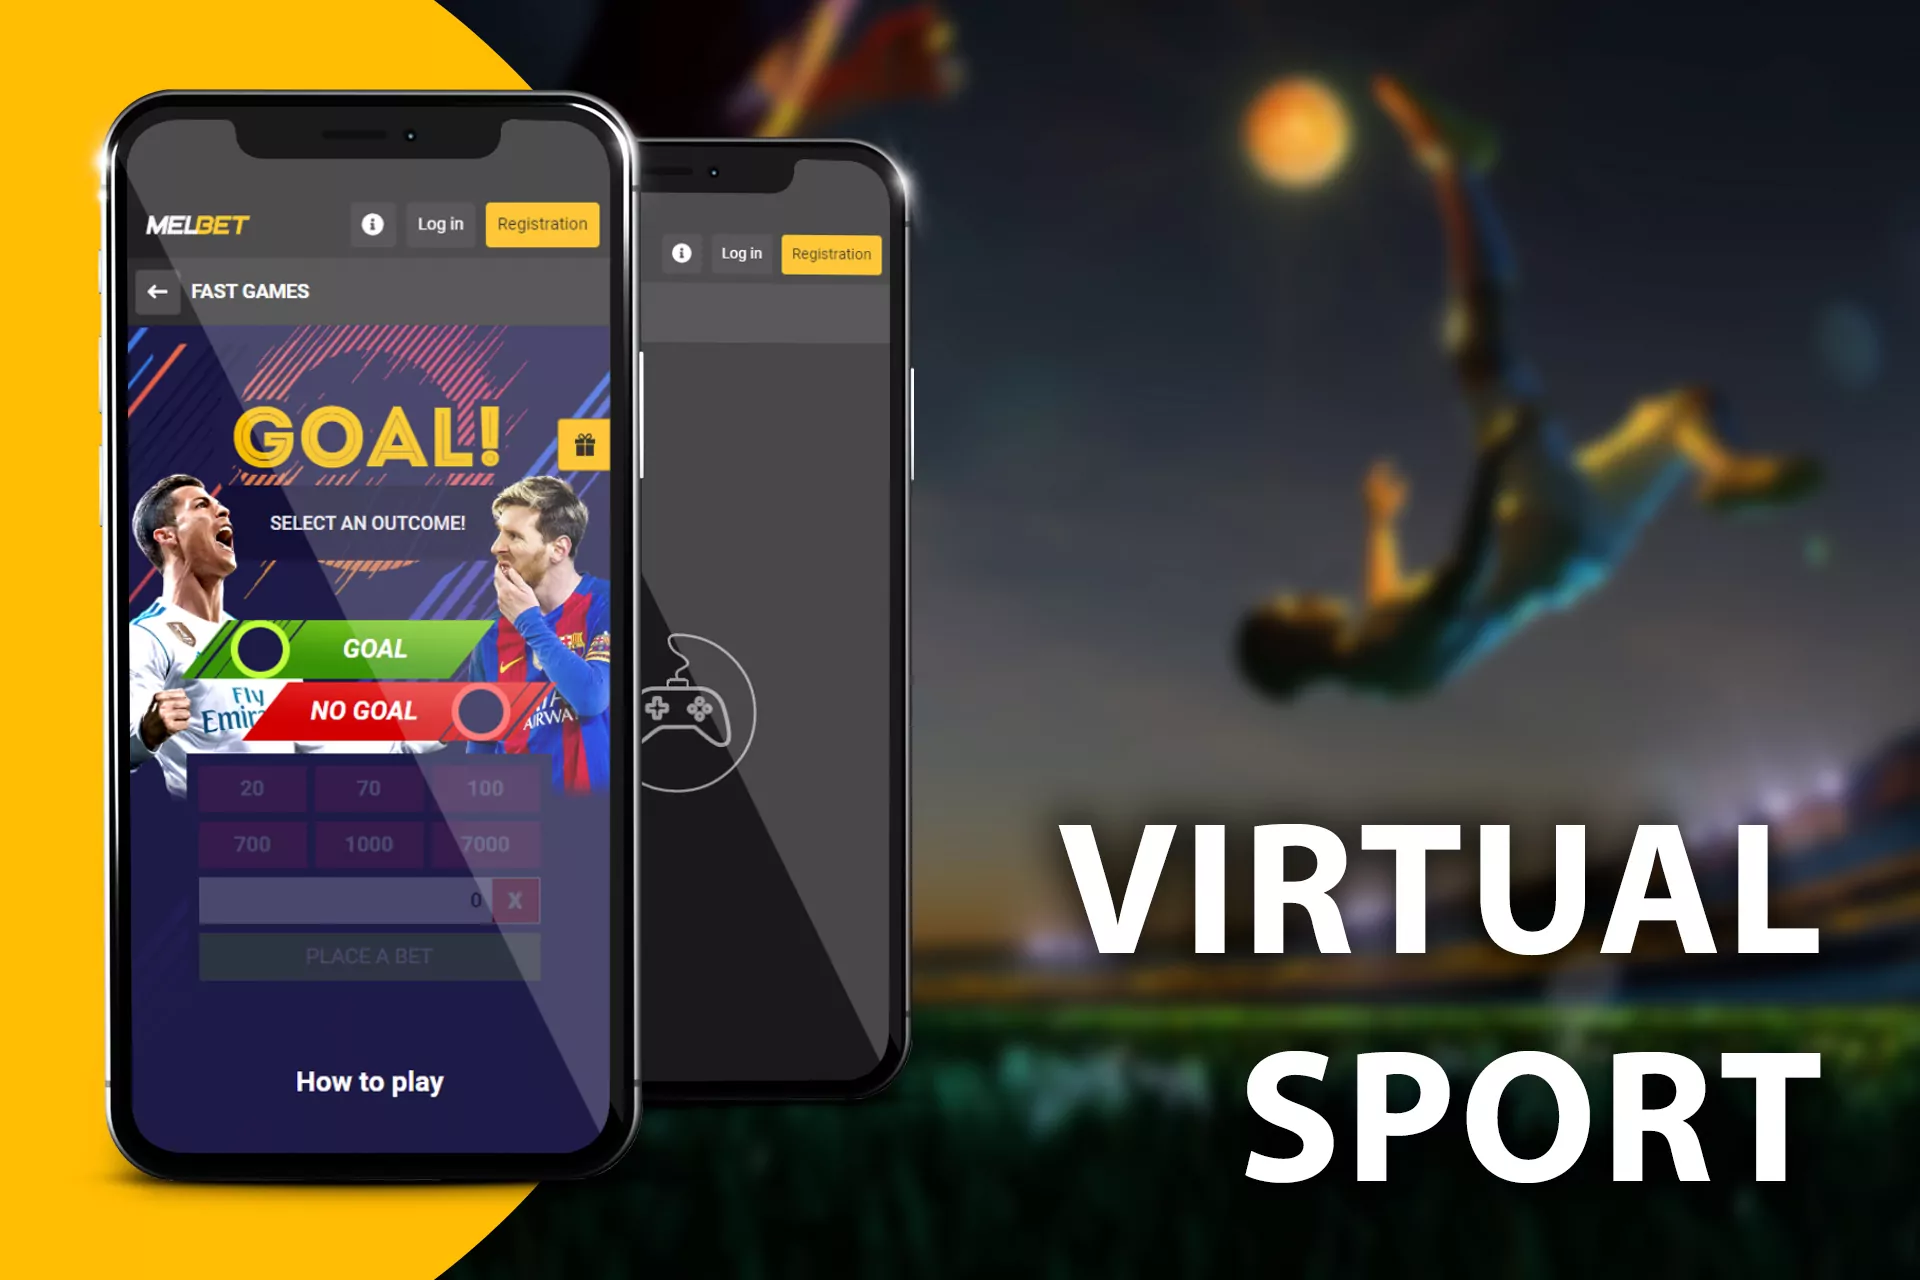 Also, you can place bets on virtual sports matches.